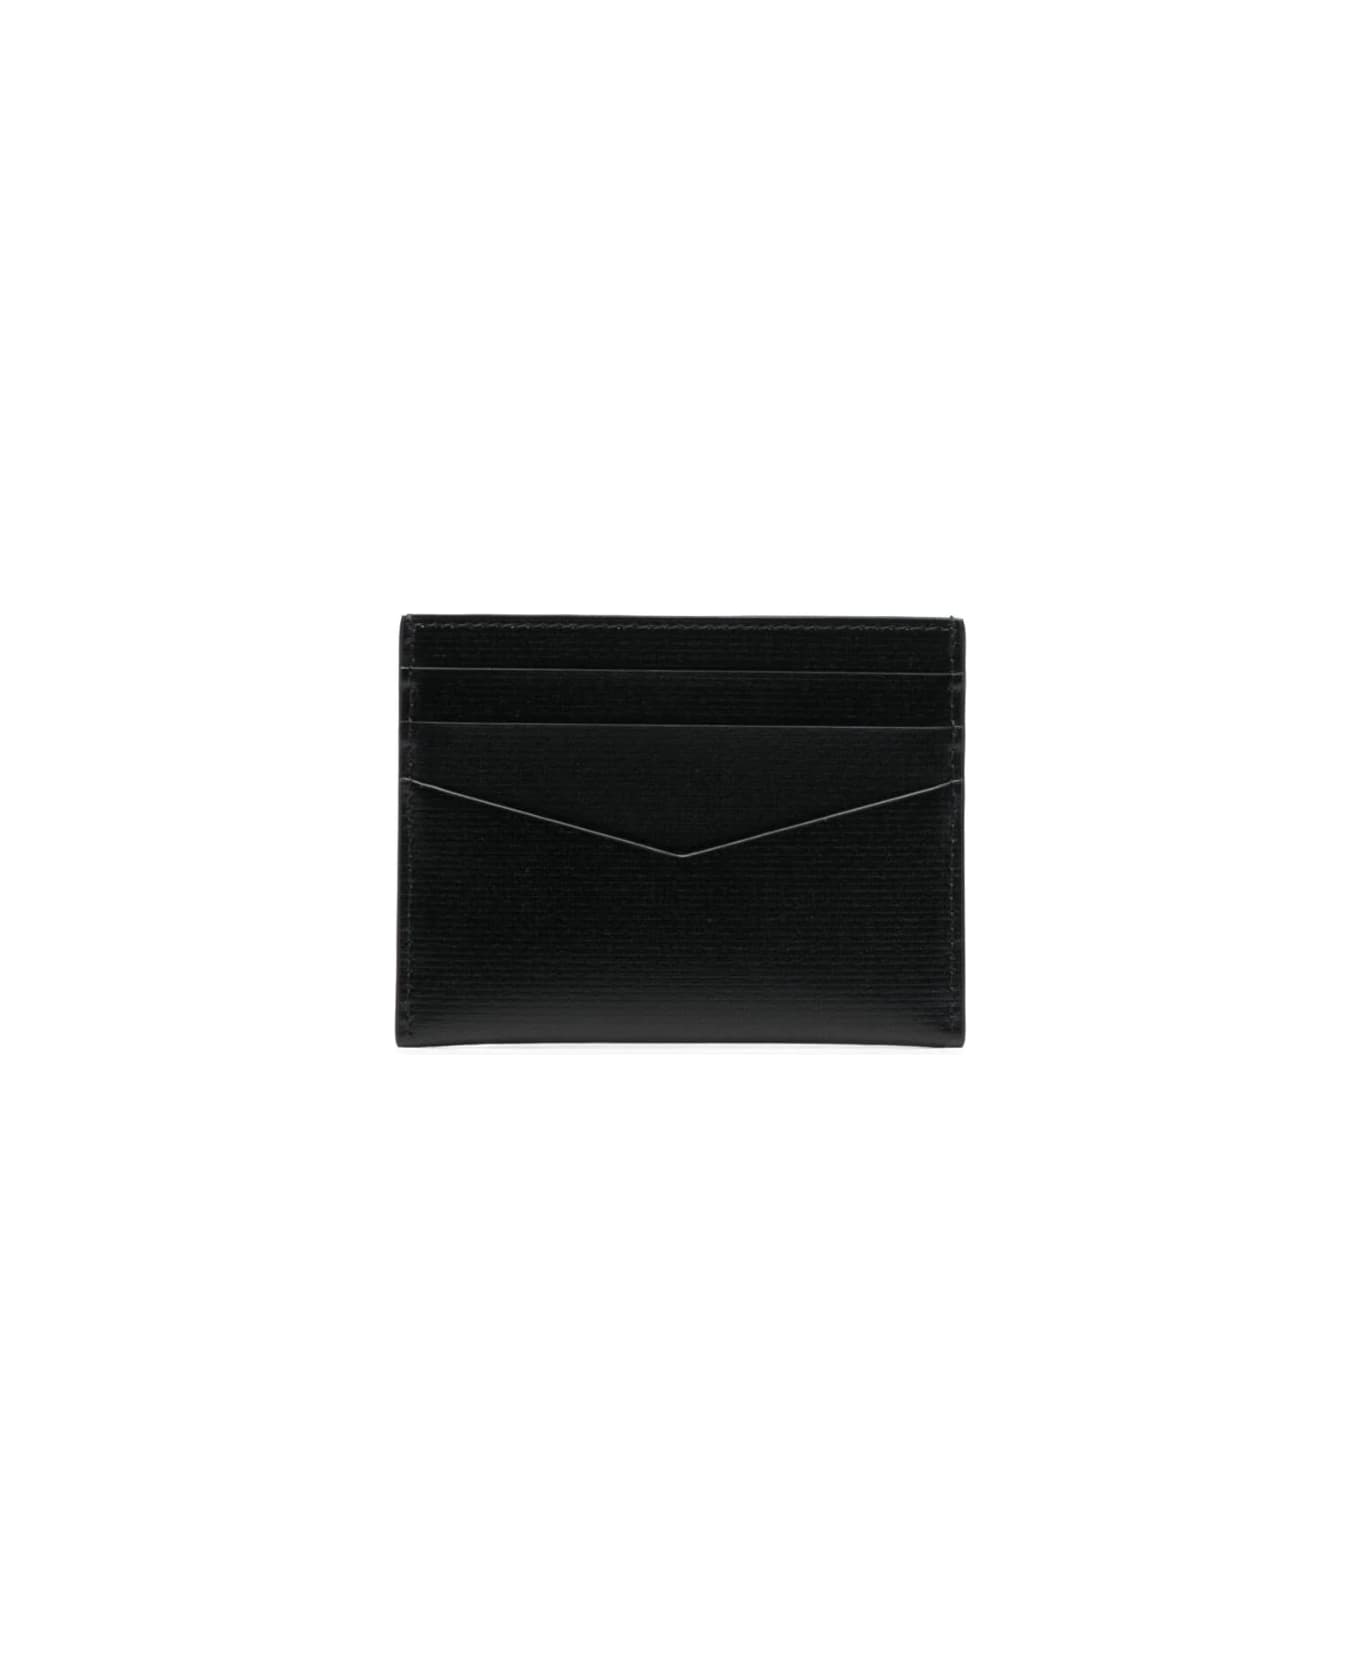 Givenchy Card Holder In Black Classique 4g Leather - Black